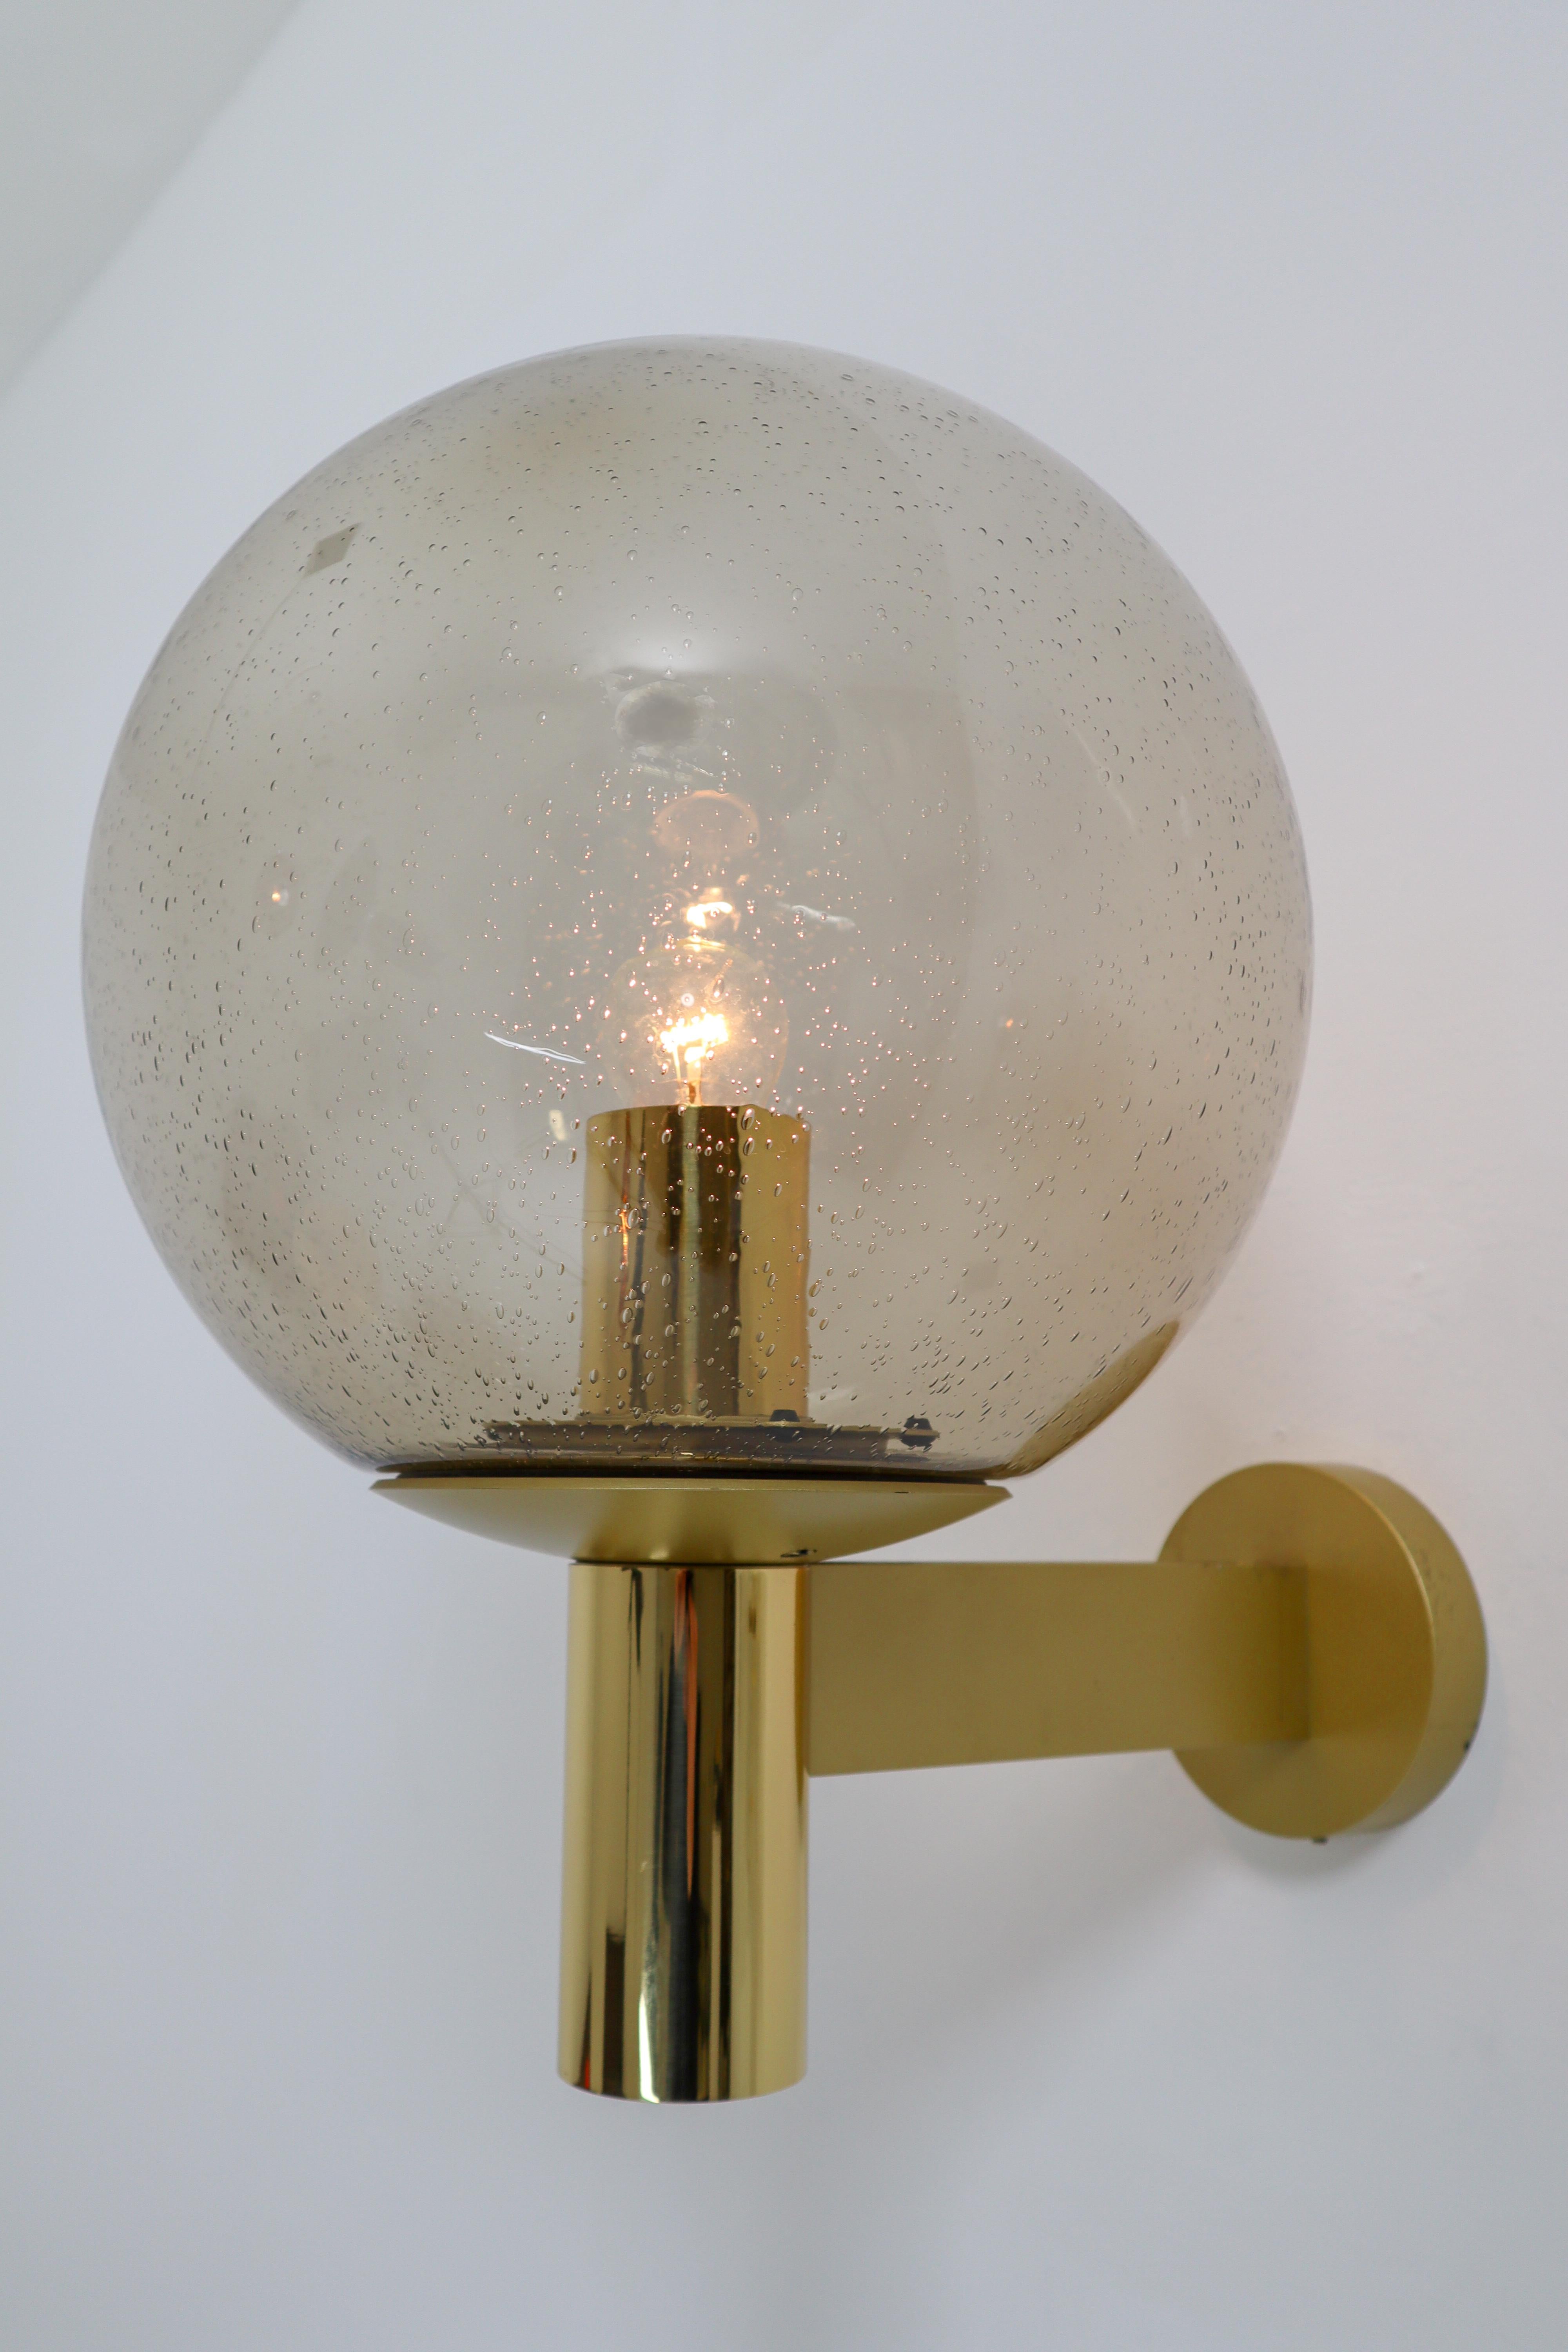 Set of four wall lights with smoked glass and brass by Glashütte Limburg, Germany, 1970s. The pleasant light it spreads is very atmospheric, these wall scones will contribute to a luxurious character of the (hotel-bar) interior. Good original